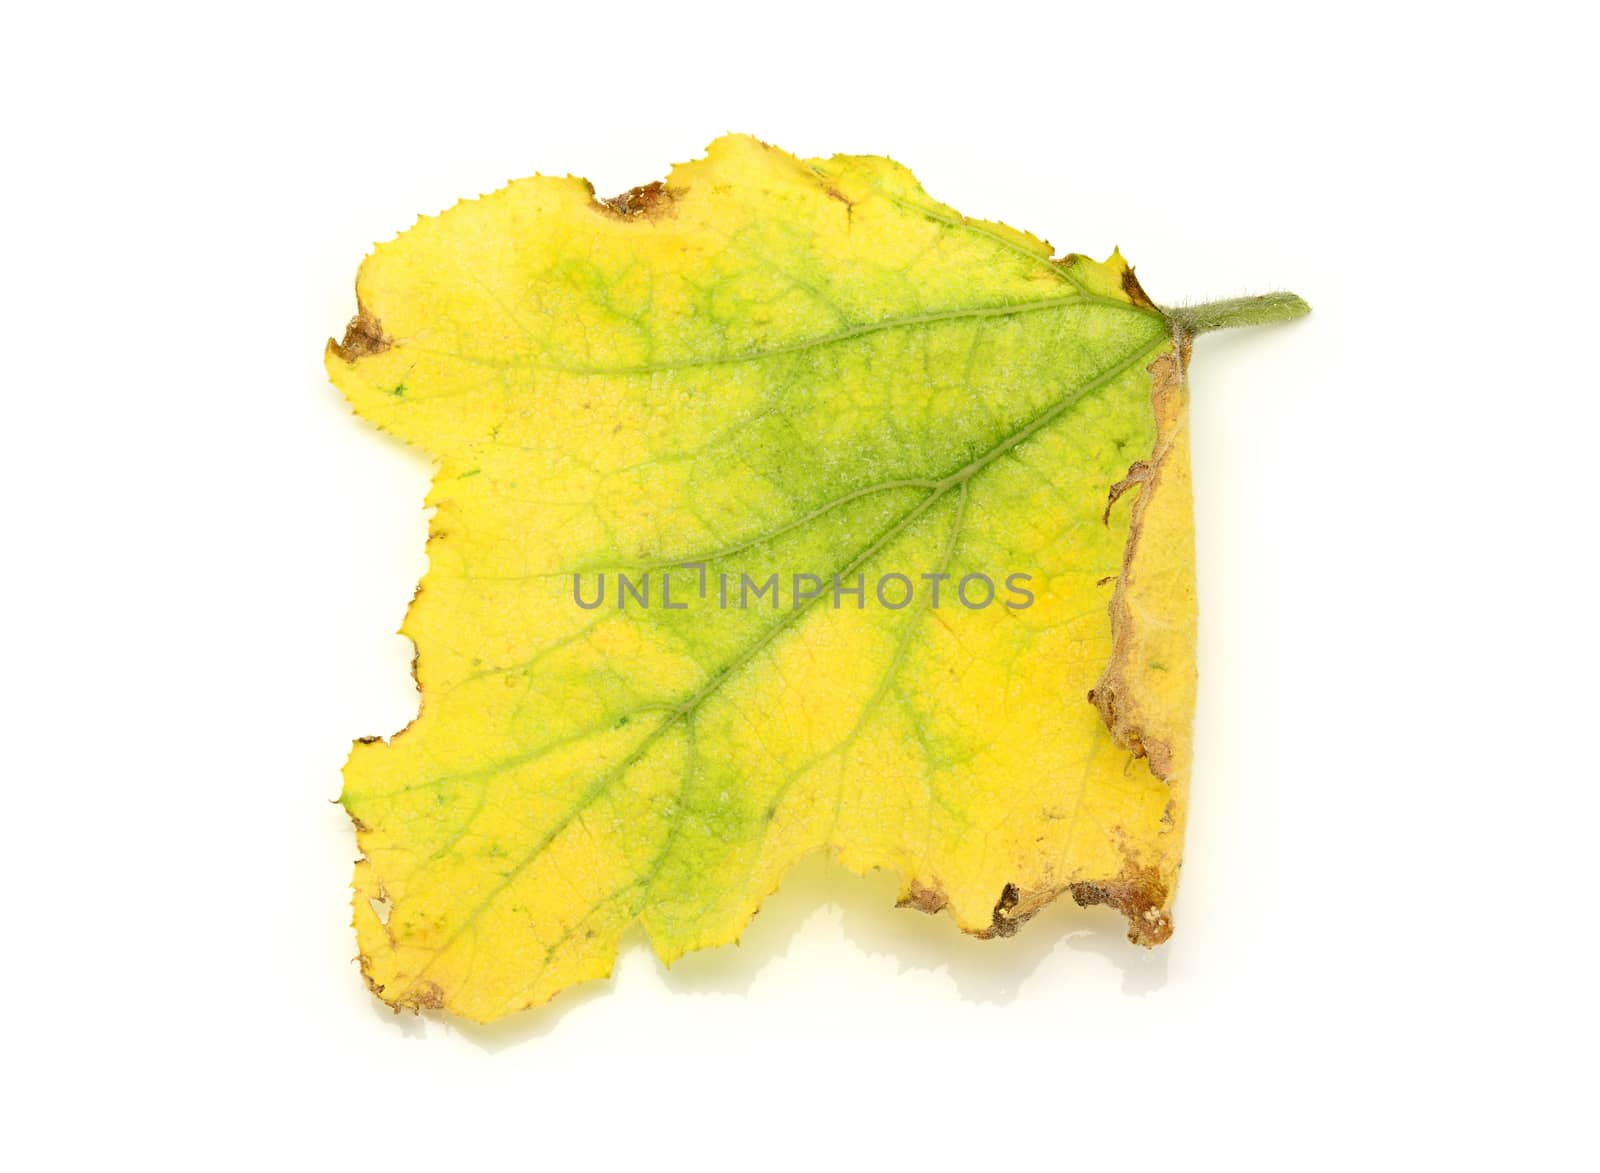 Yellowing and dying pumpkin leaves on white by ipuwadol